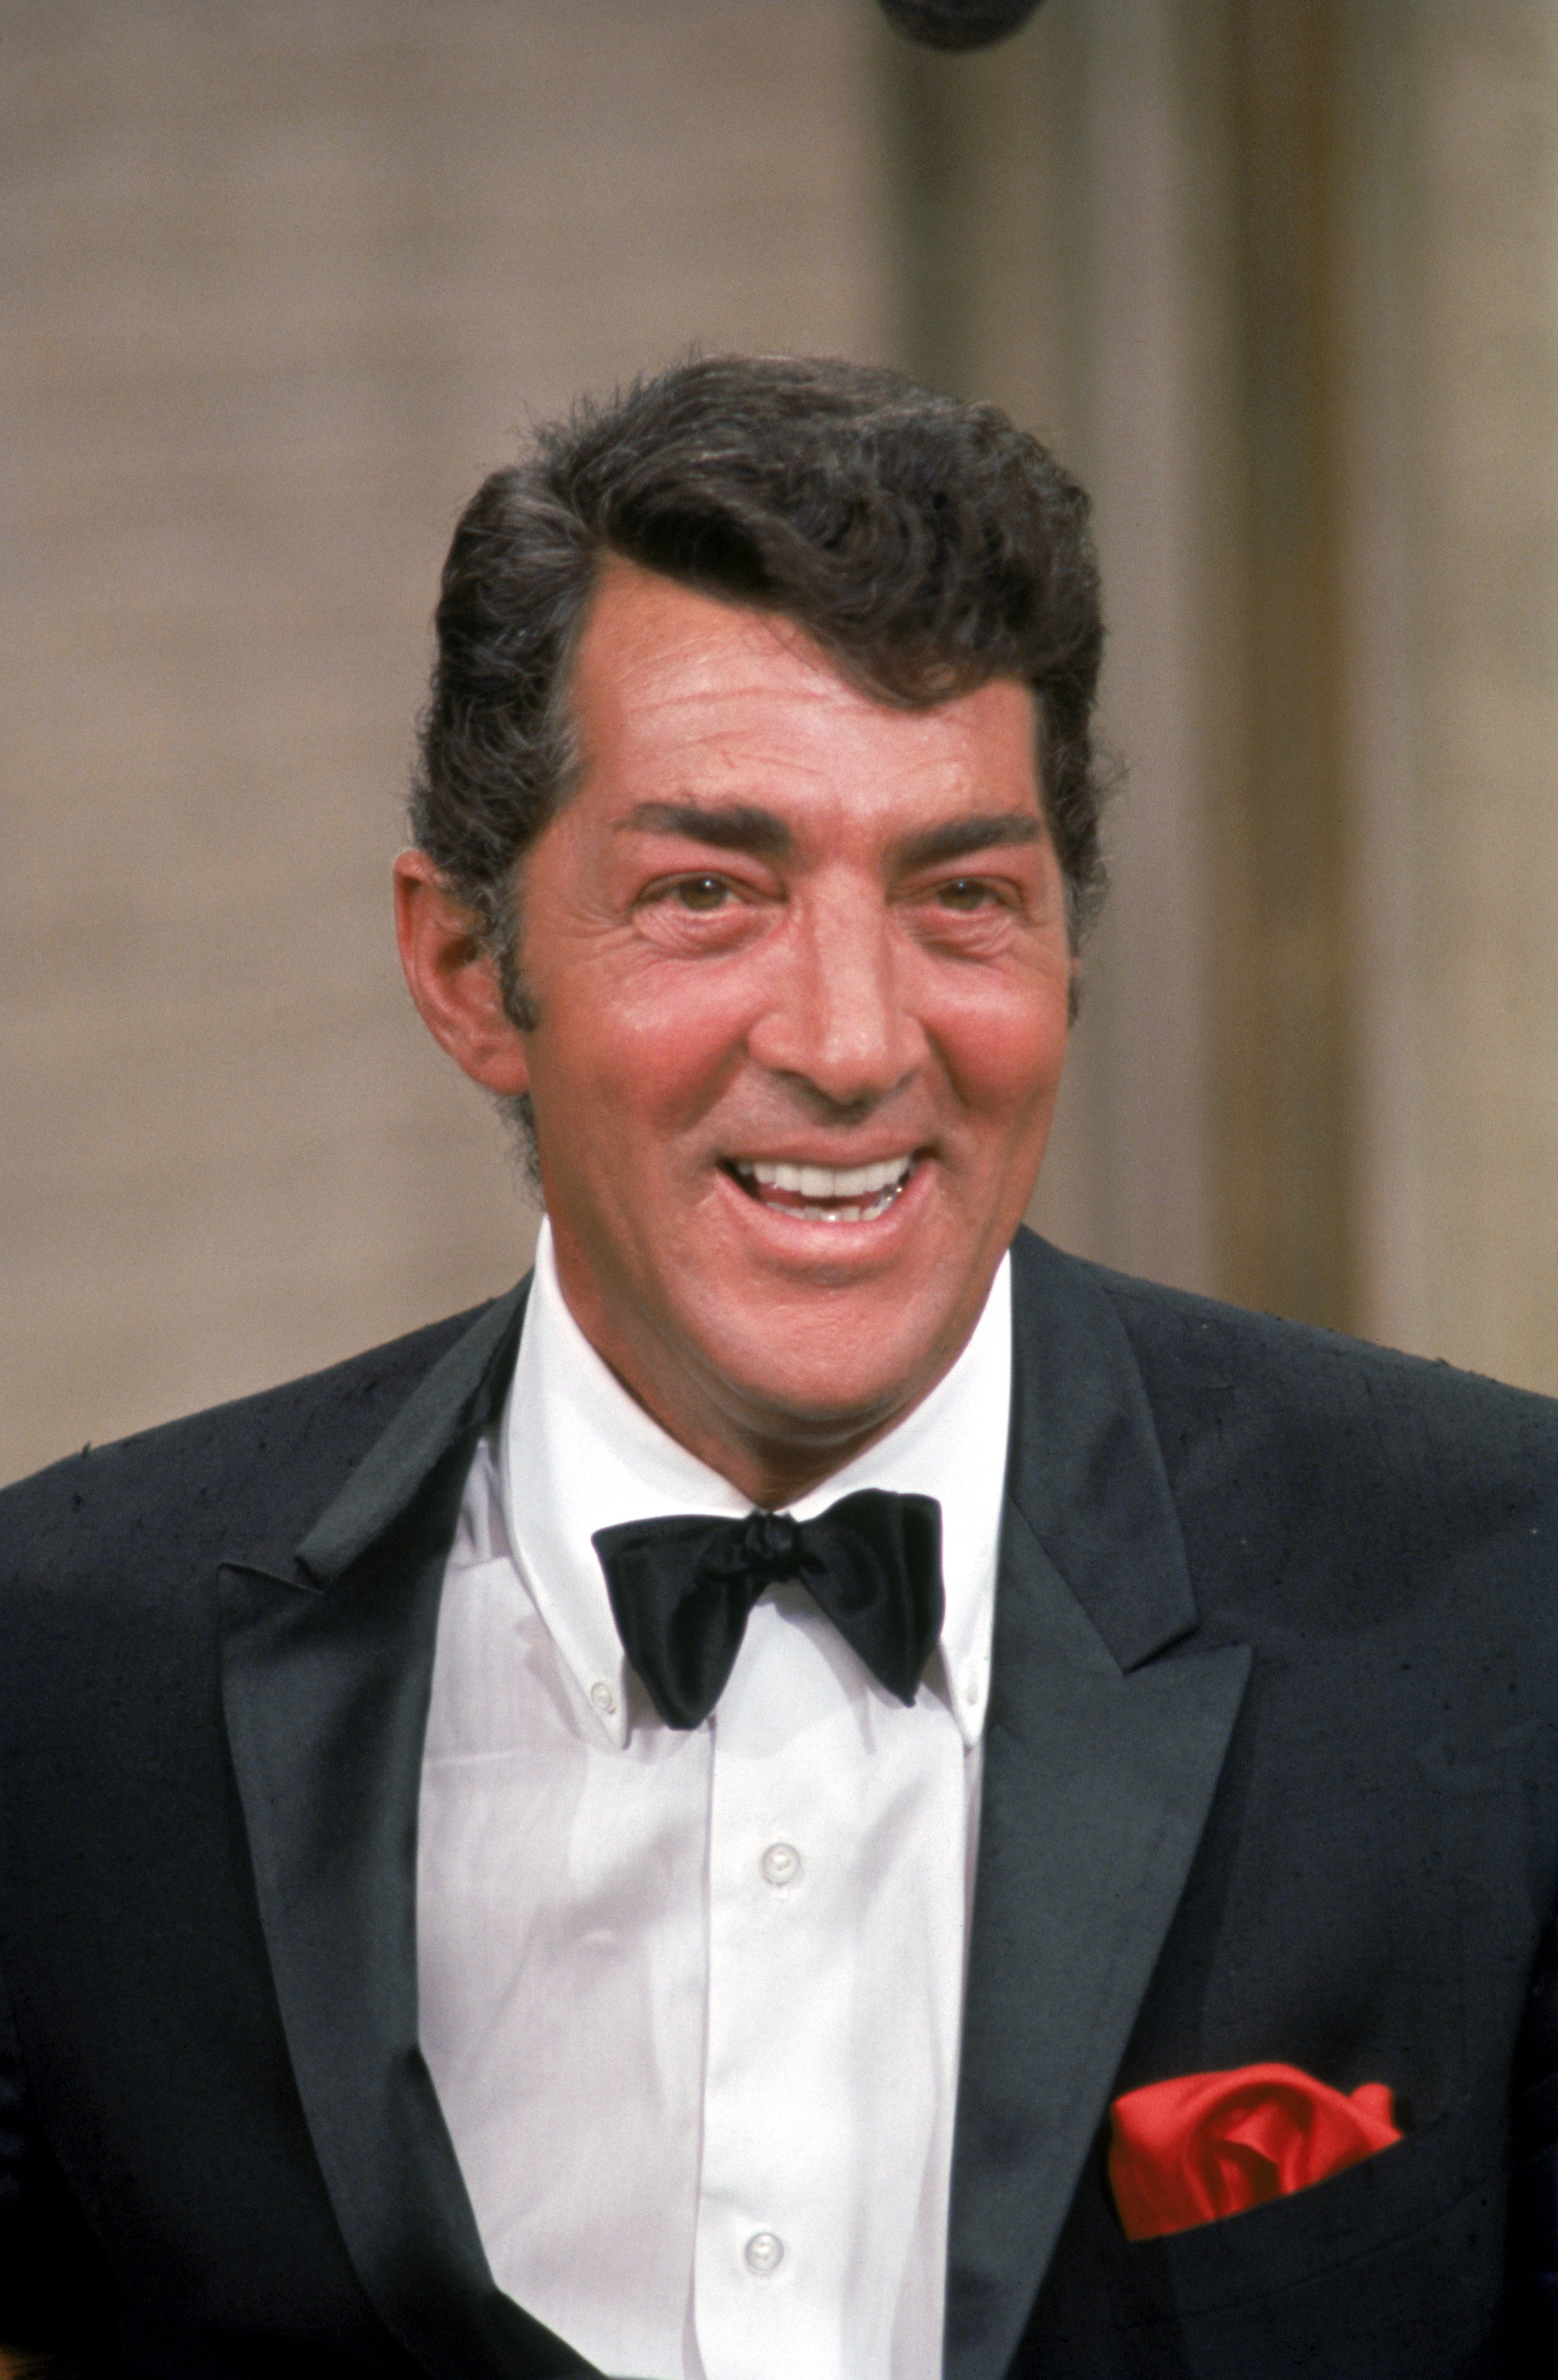 Dean Martin on the set during filming of "The Dean Martin show" in 1967. | Source: Getty Images